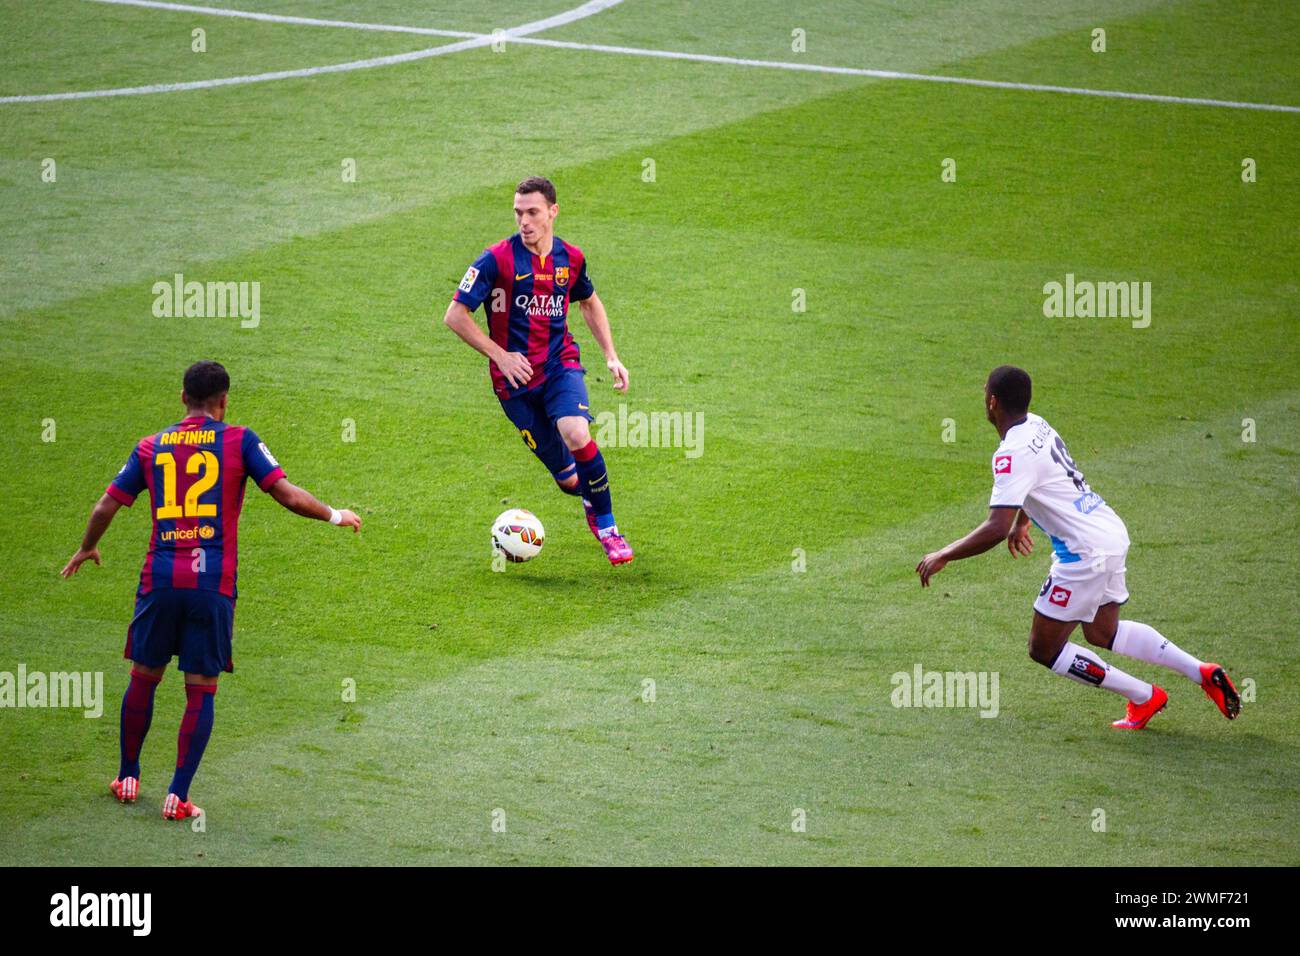 THOMAS VERMAELEN, BARCELONA FC, 2015: Thomas Vermaelen drives at the Deportivo defence. The final game of the La Liga 2014-15 season in Spain between Barcelona FC and Deportivo de La Coruna at Camp Nou, Barcelona on May 23 2015. The Game finished 2-2. Barcelona celebrated winning the championship title and legend Xavi's final home game. Deportiva got the point they needed to avoid relegation. Photograph: Rob Watkins Stock Photo